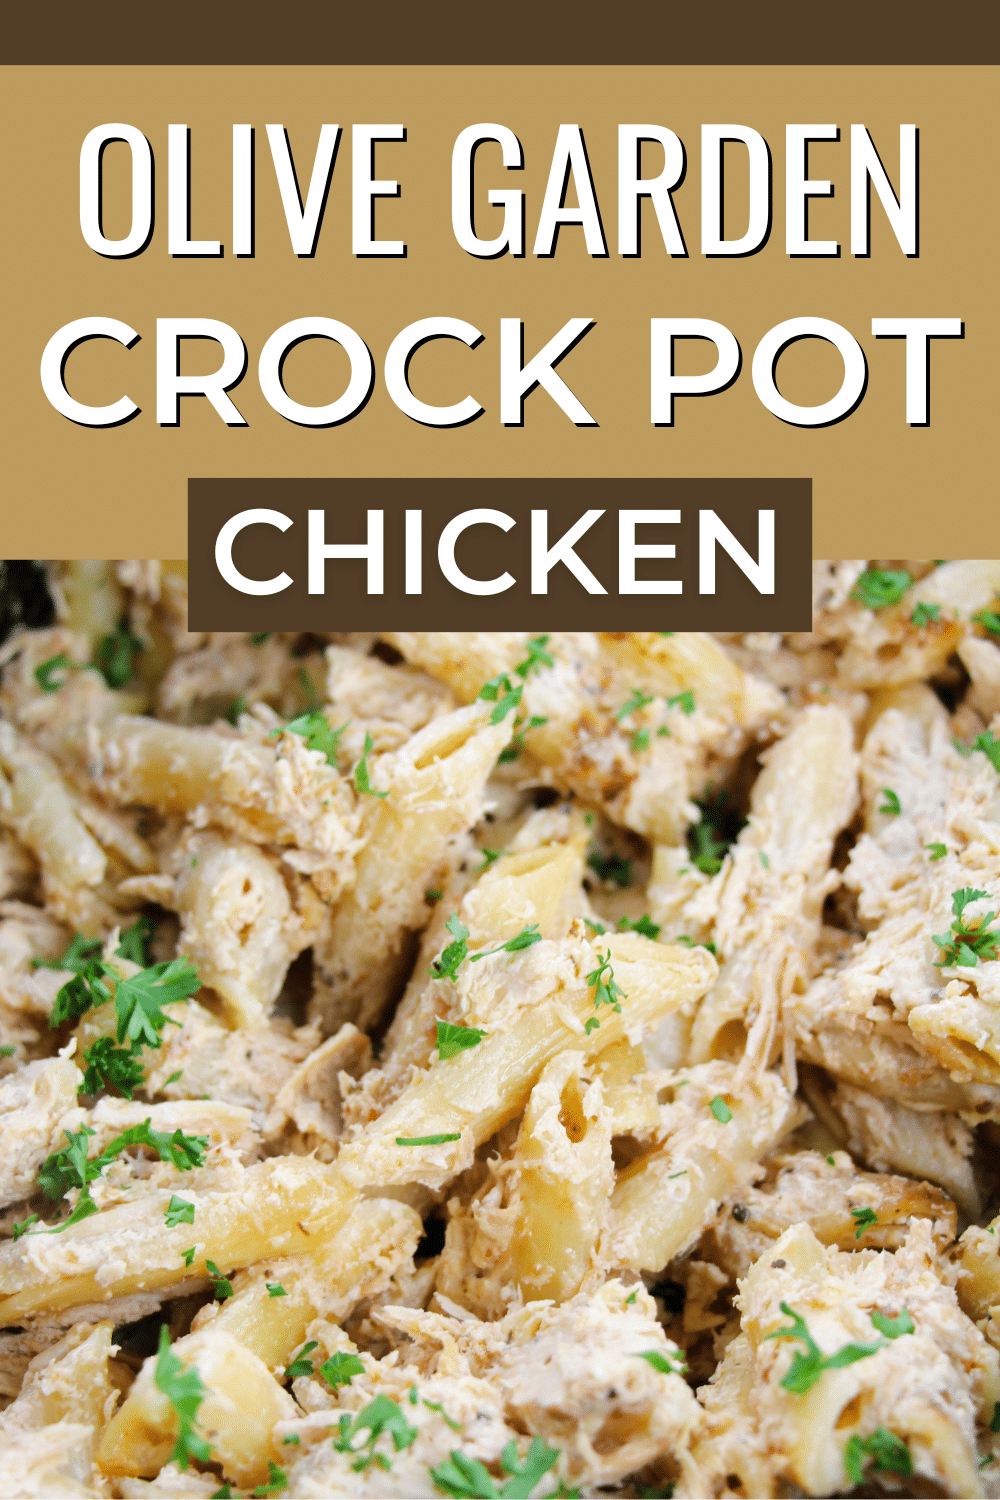 Olive Garden crock pot chicken is a delicious and easy-to-make recipe that brings the flavors of the iconic restaurant to your own home. This slow cooker dish combines tender chicken with a rich and savory